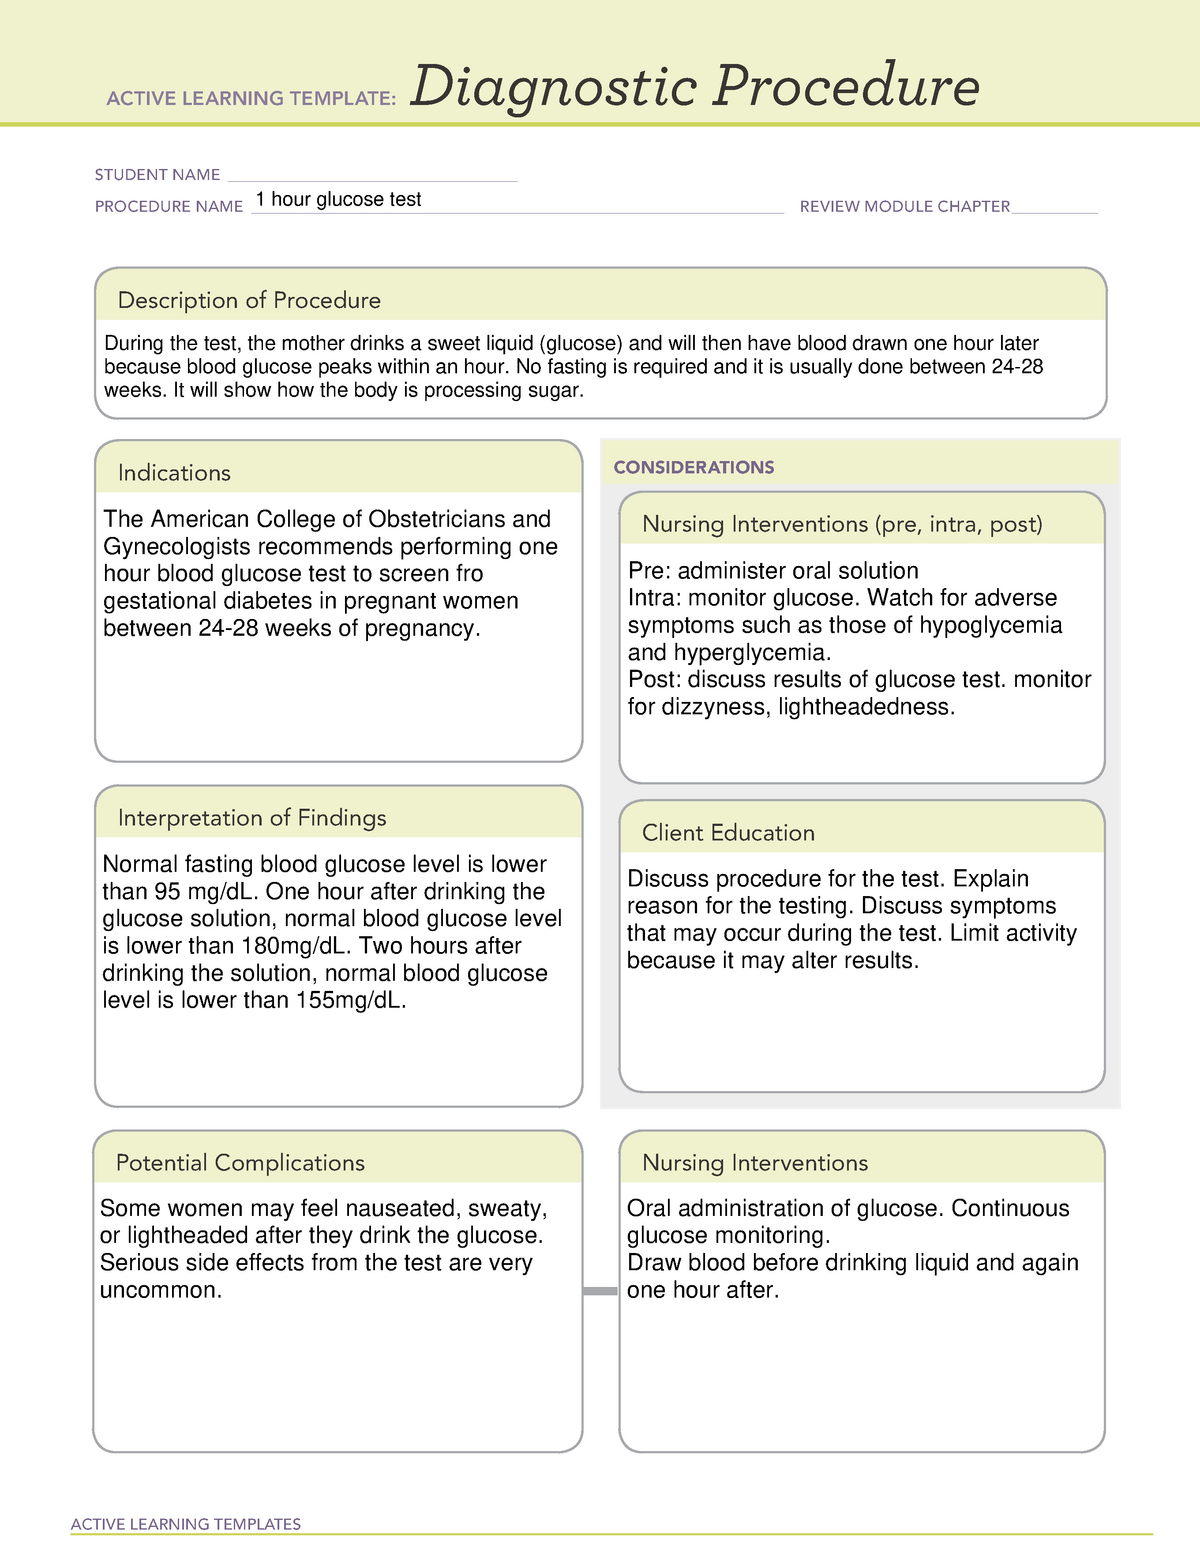 Diagnostic procedure 1 hour Glucose - ACTIVE LEARNING TEMPLATES ...